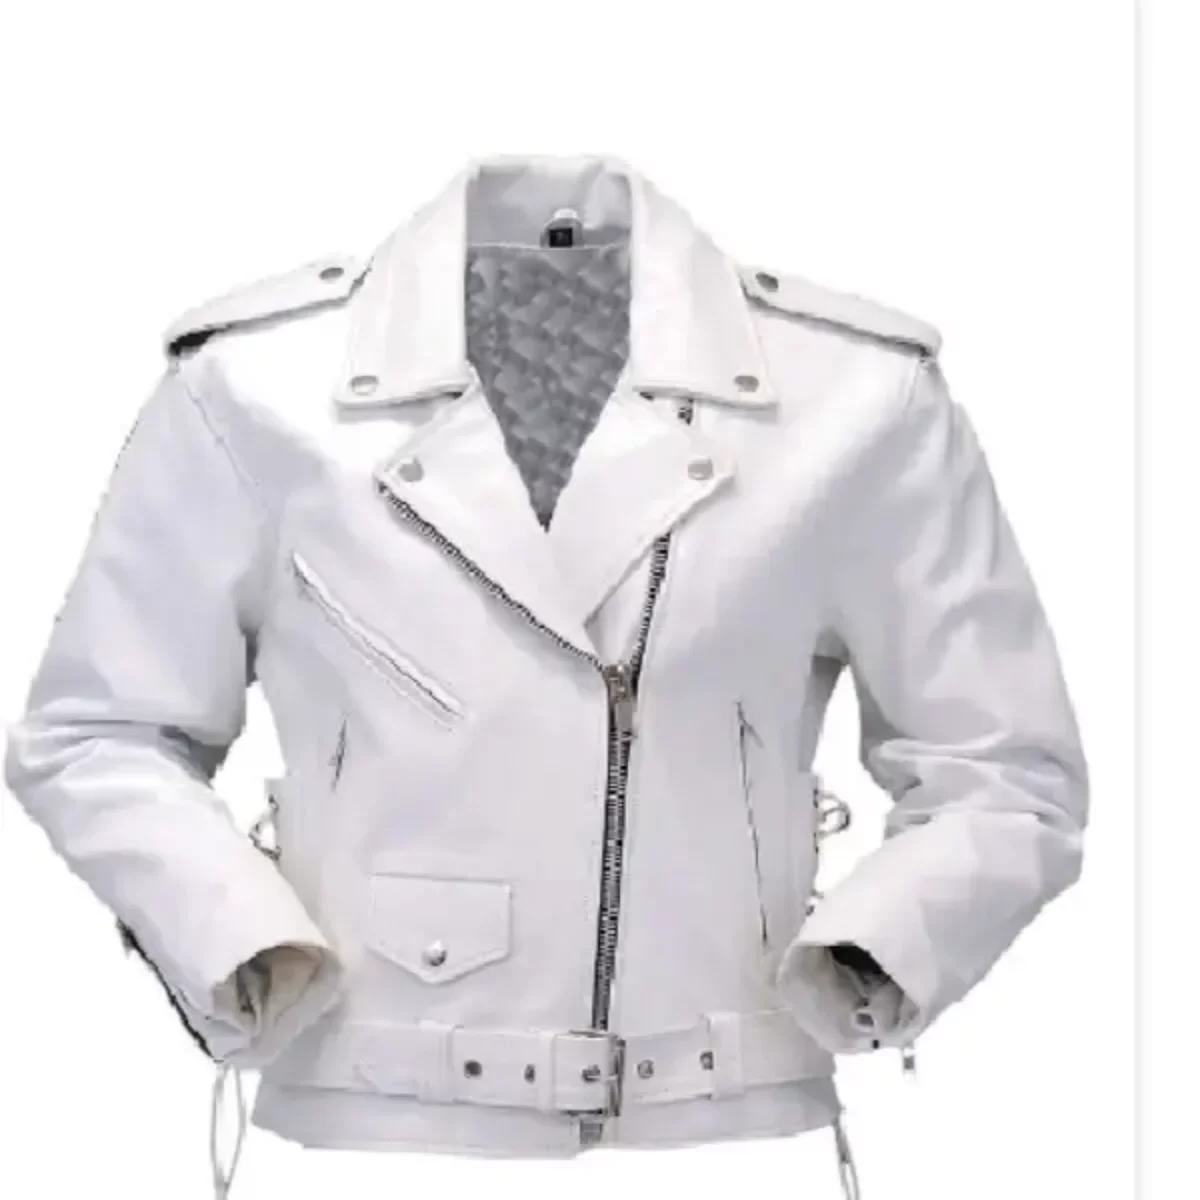 White Leather Jackets - Buy White Leather Jackets online at Best Prices in  India